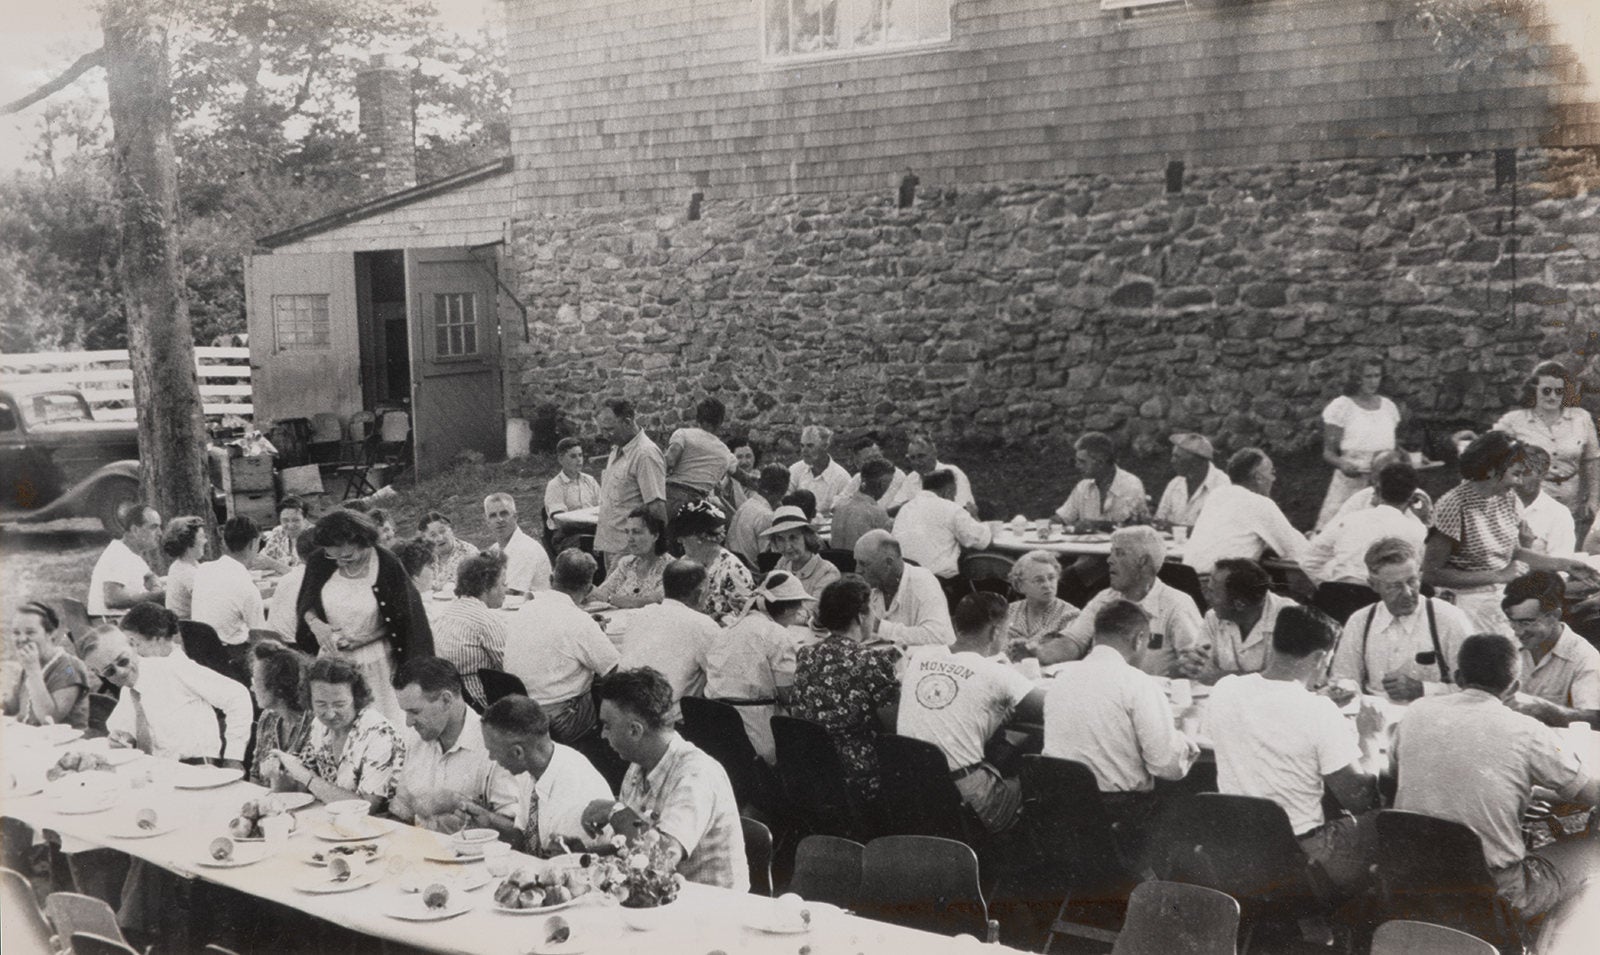 A black and white photo showing a banquet style outdoor gathering of local fruit growers from 1930